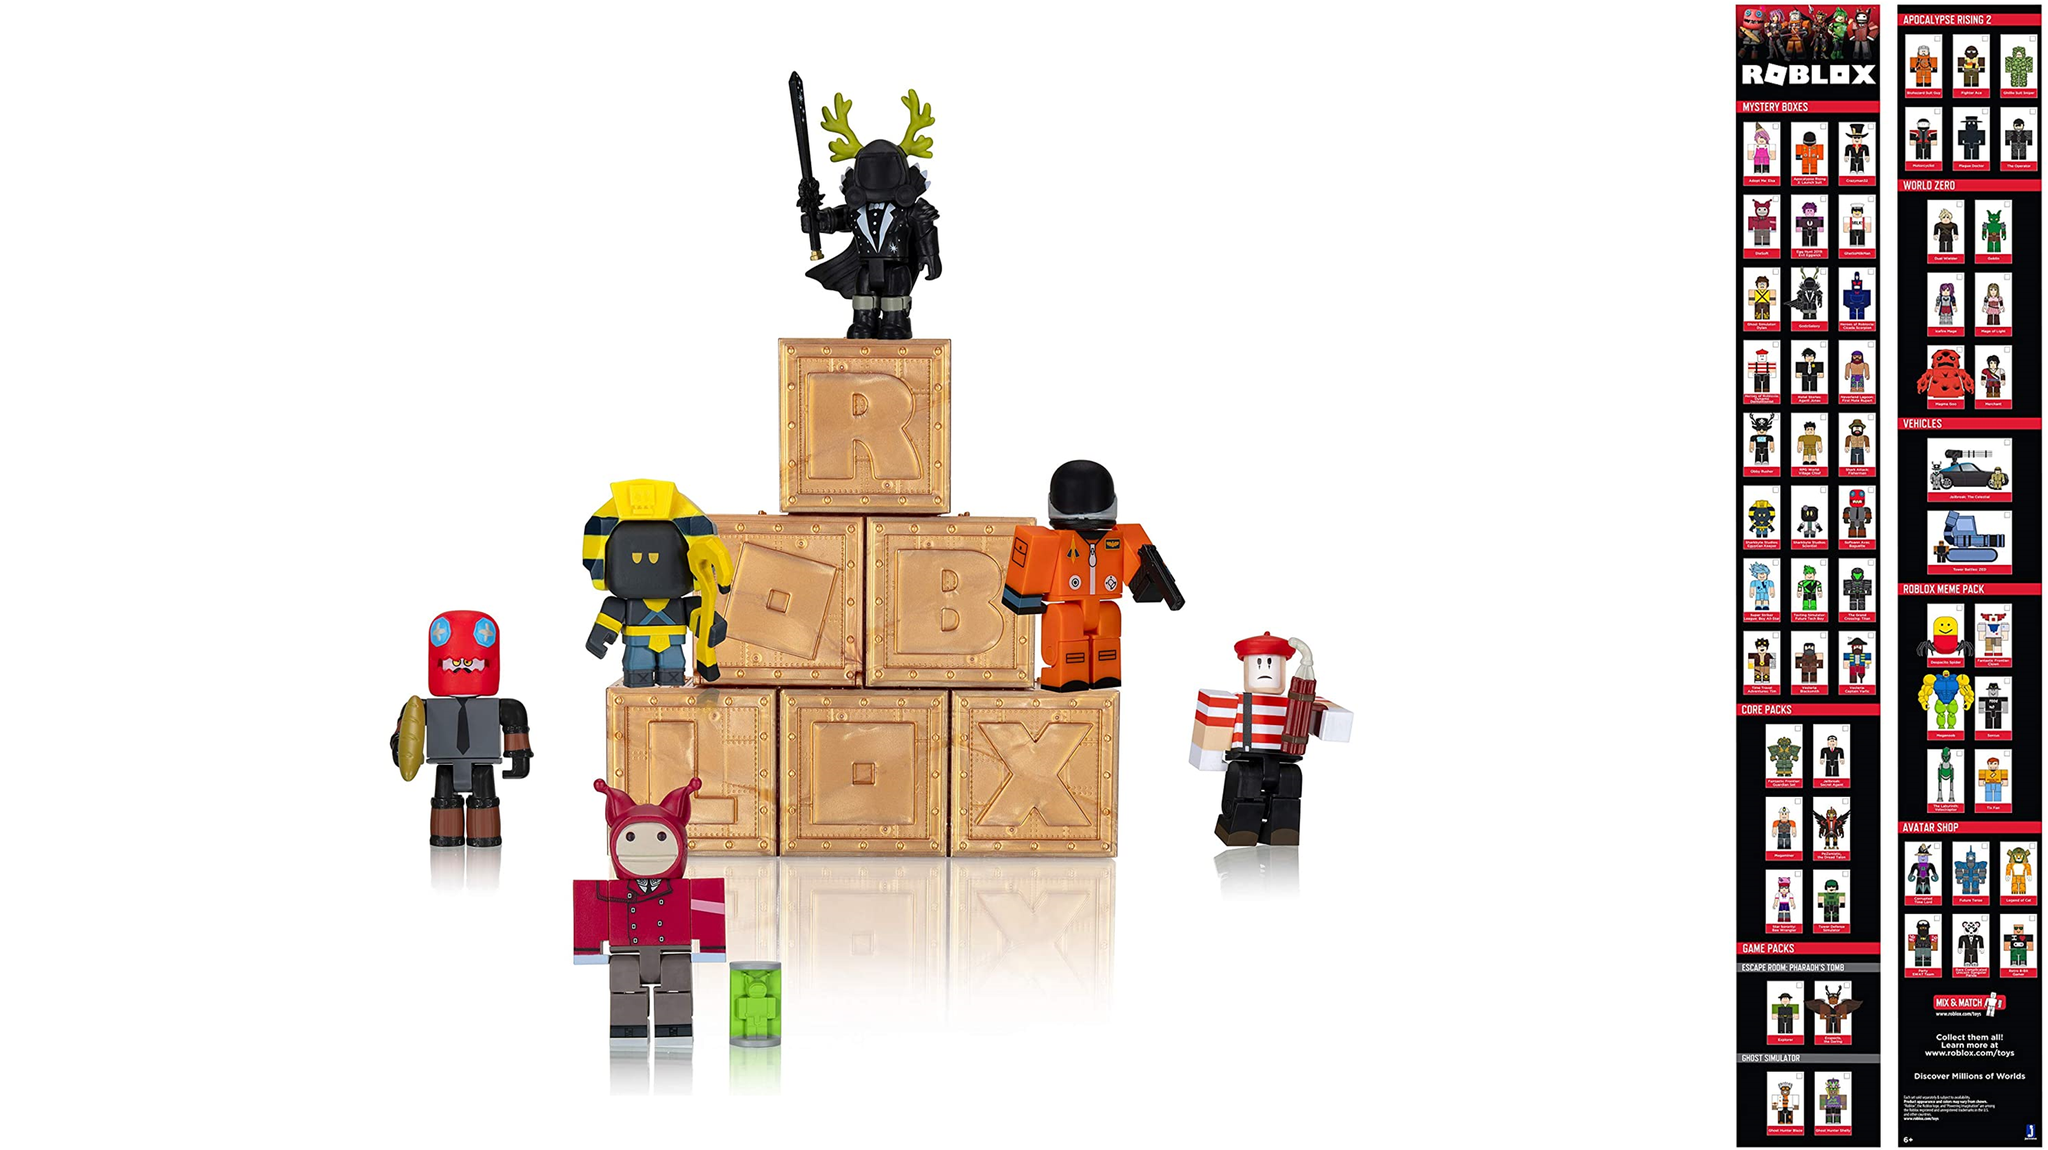 Bloxy News On Twitter For Those Interested In Collecting Robloxtoys Series 8 Of The Action Collection Mystery Boxes Are Now Available To Purchase On Amazon Https T Co E6kmdfydld Https T Co Bpoerep4sz - jazwares on twitter collect 24 of our roblox mystery figure packs including mr robot roblox series 1 toys are available https t co rbwqikkxly robloxtoys https t co ymmun3bi1t